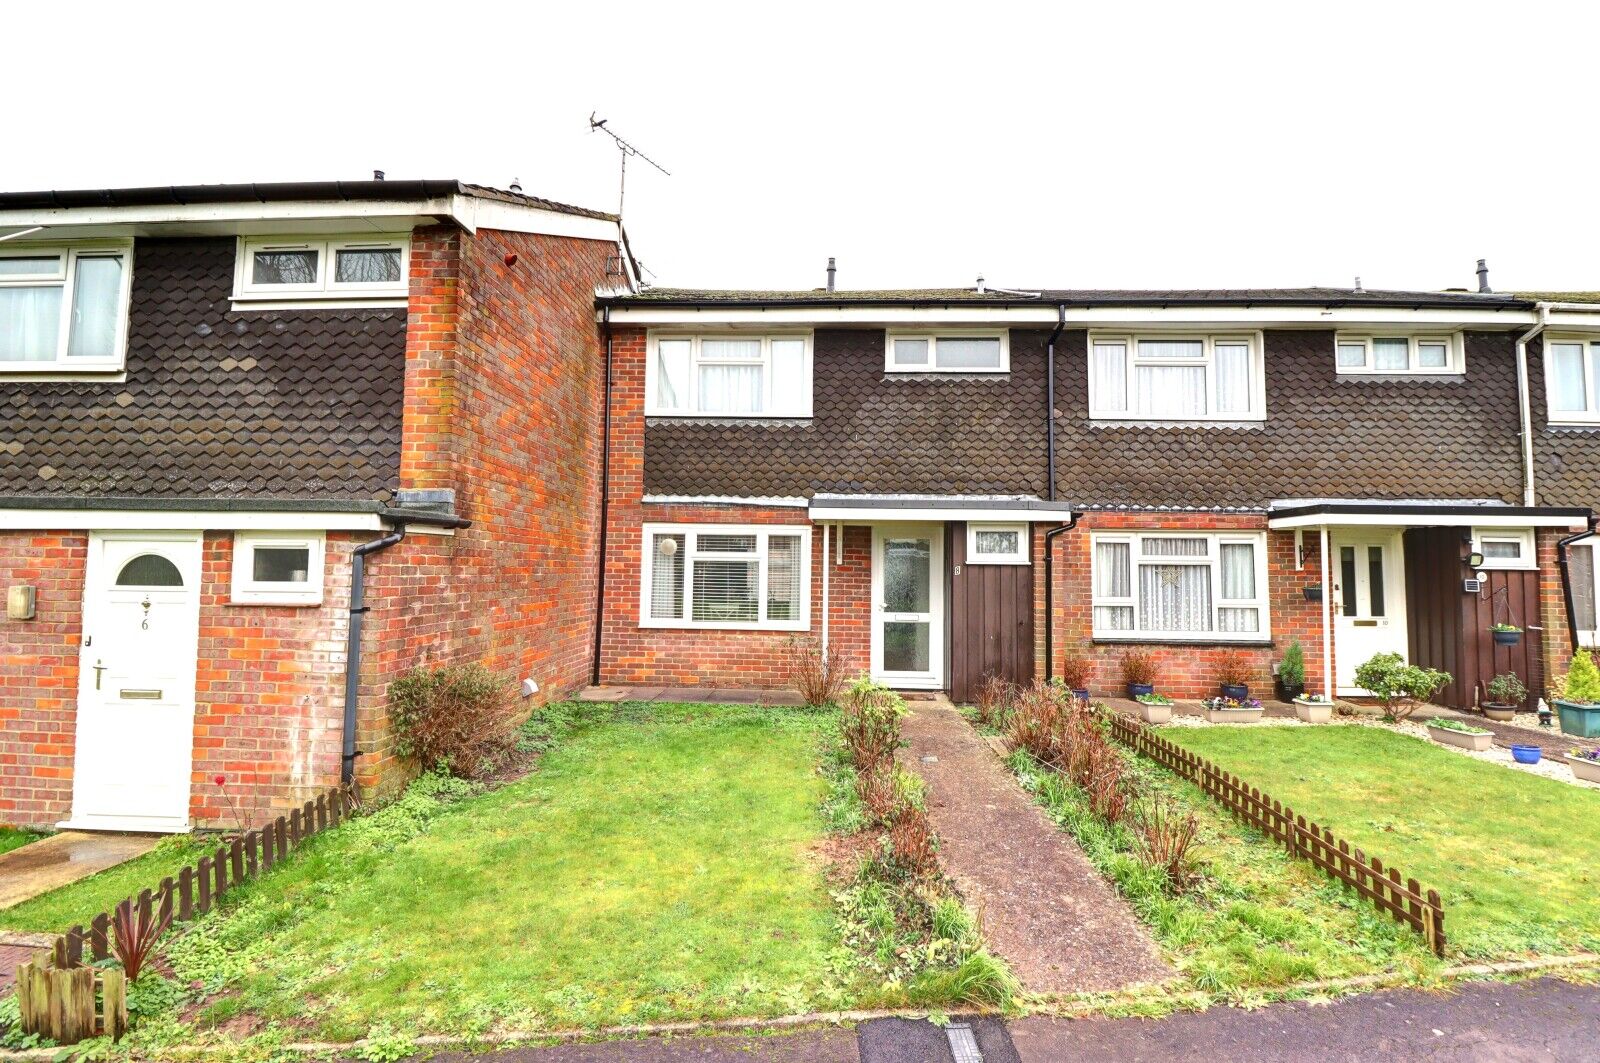 3 bedroom mid terraced house to rent, Available from 15/03/2024 Groom Road, Prestwood, HP16, main image